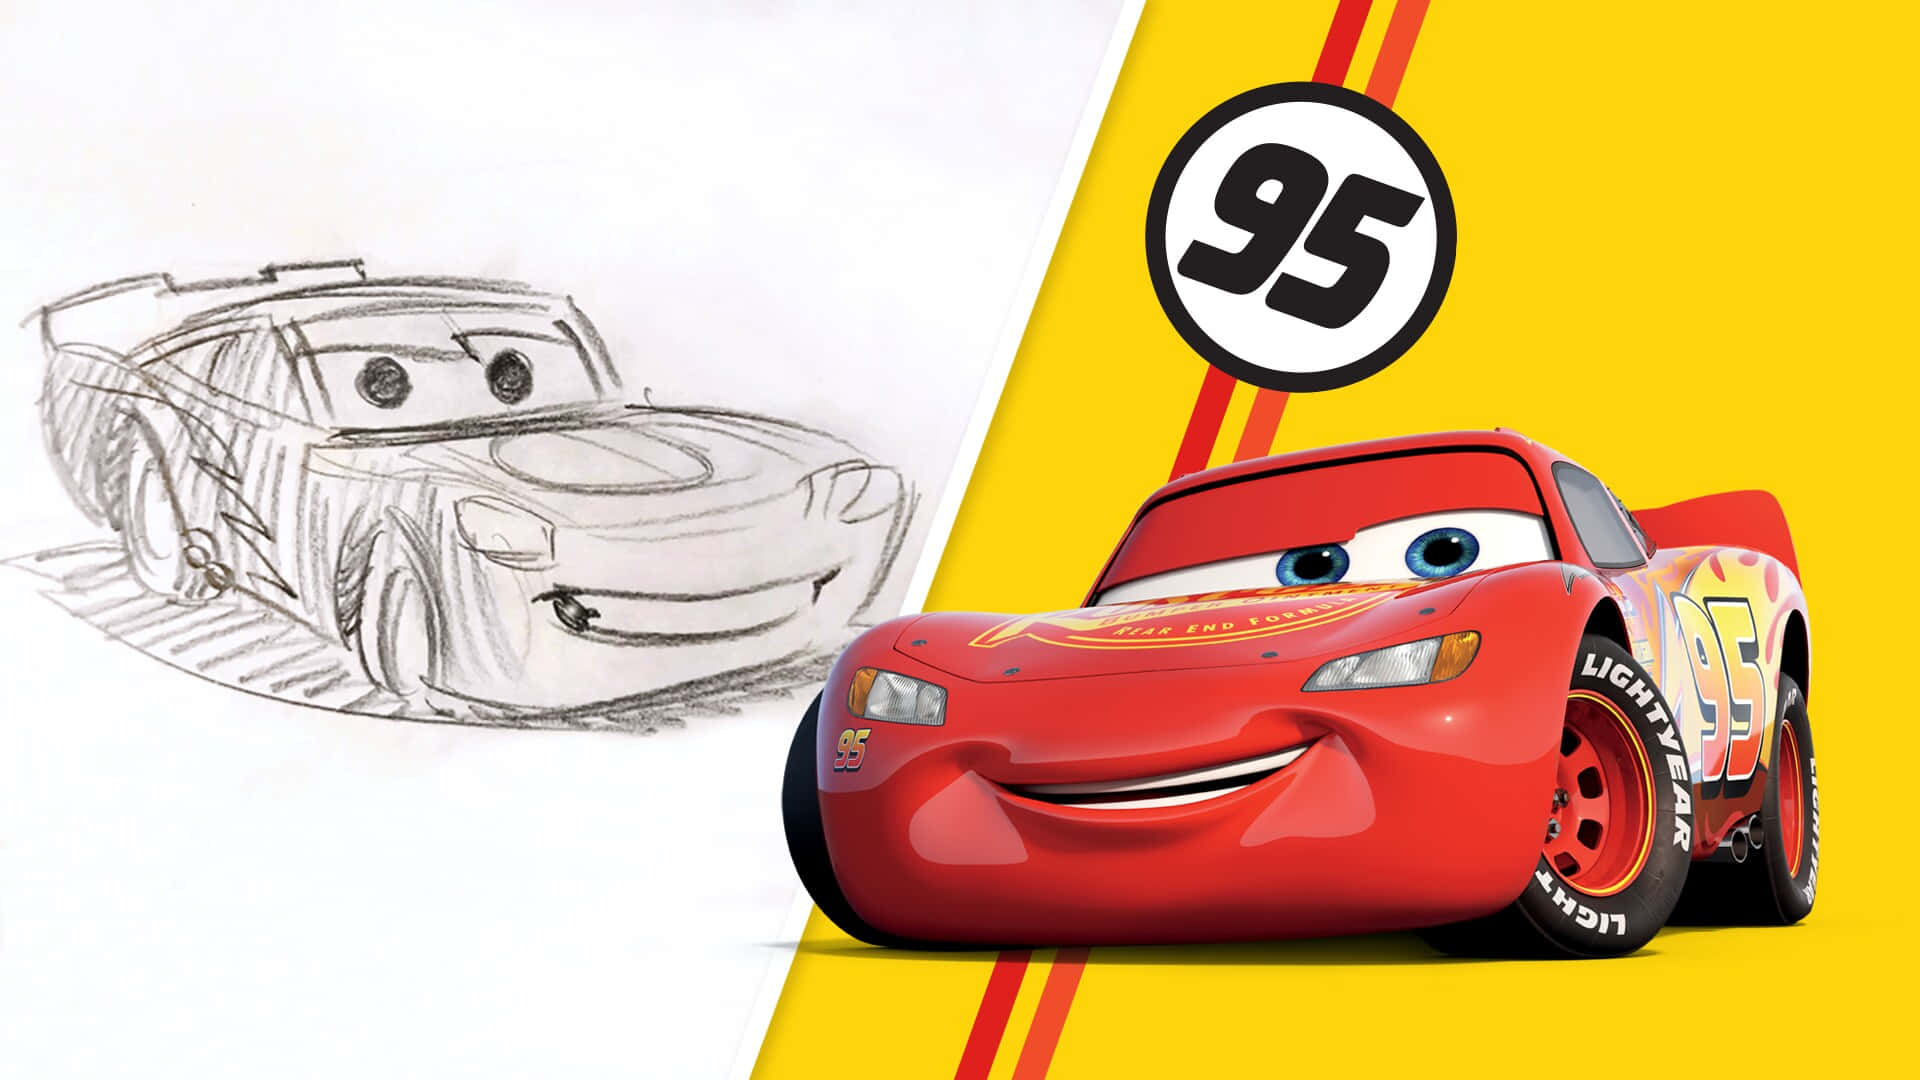 30+ Pretty Image of Lightning Mcqueen Coloring Pages - albanysinsanity.com  | Lightning mcqueen drawing, Cars coloring pages, Lightning mcqueen